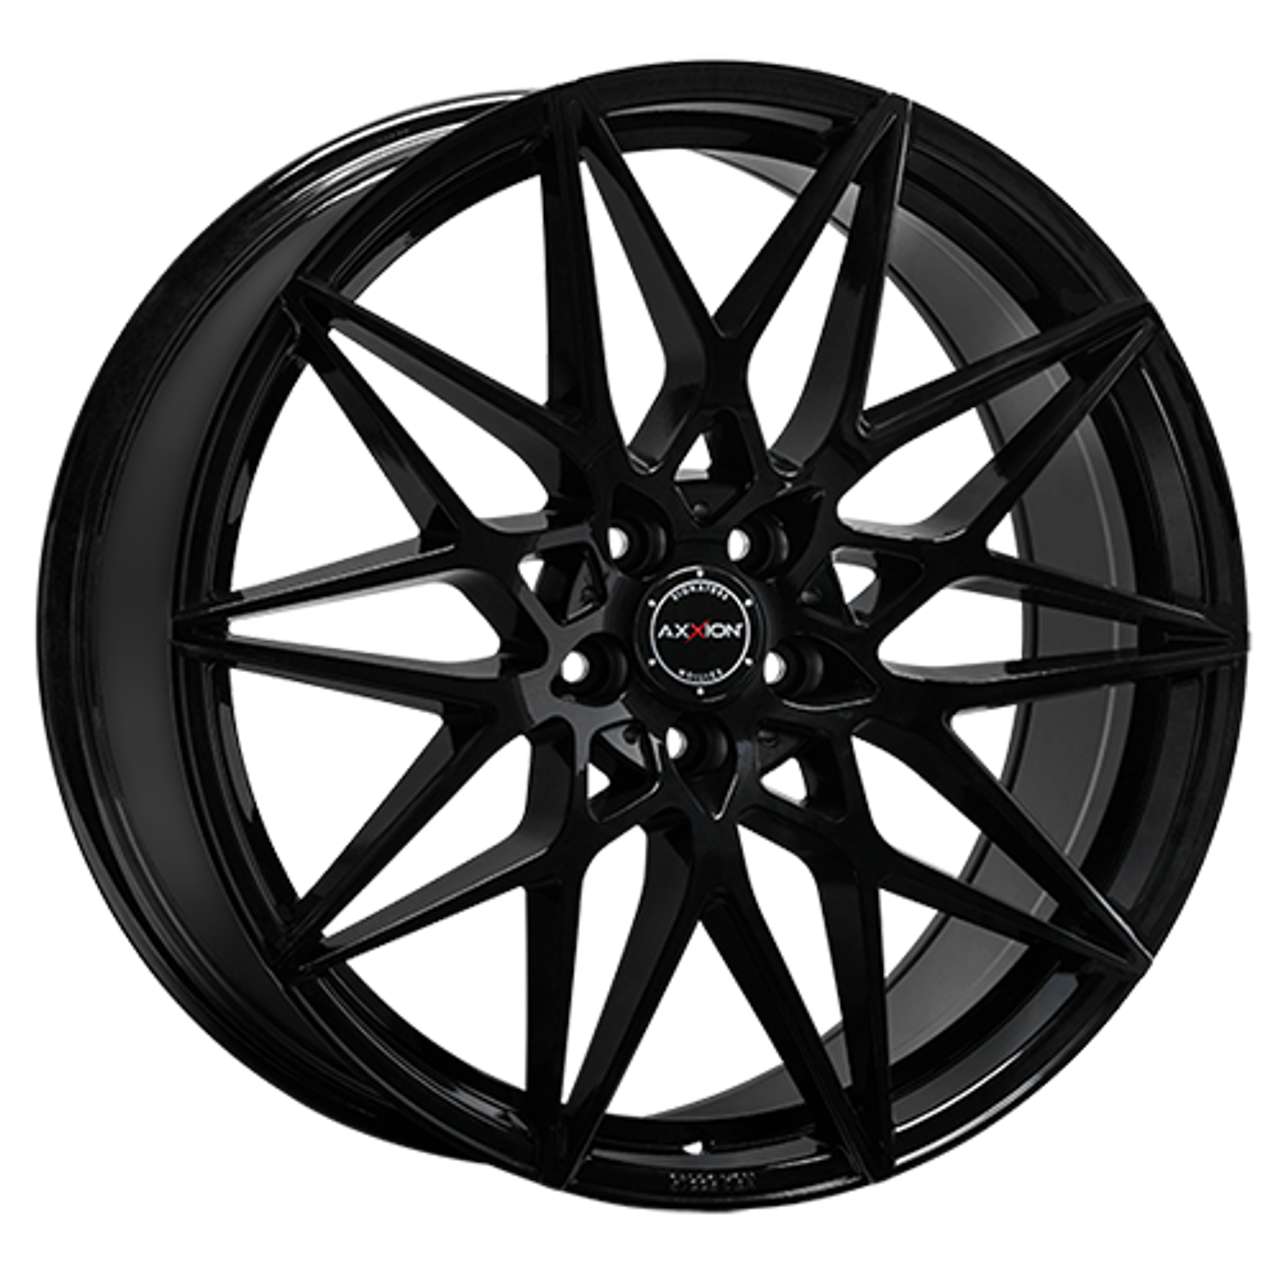 AXXION AX9 black glossy painted 8.5Jx19 5x120 ET25